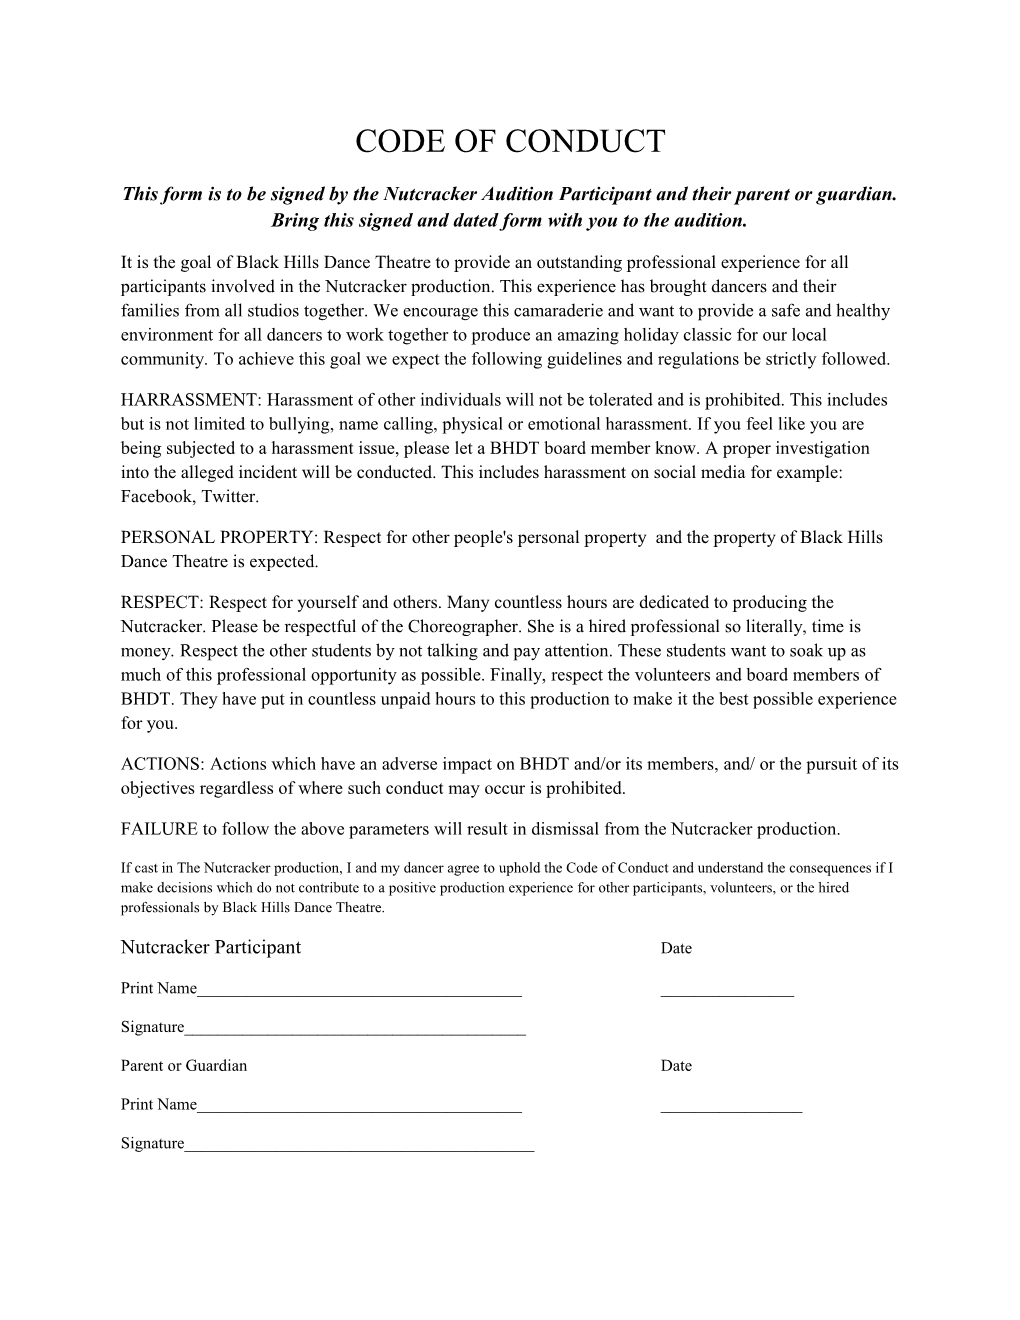 This Form Is to Be Signed by the Nutcracker Audition Participant and Their Parent Or Guardian